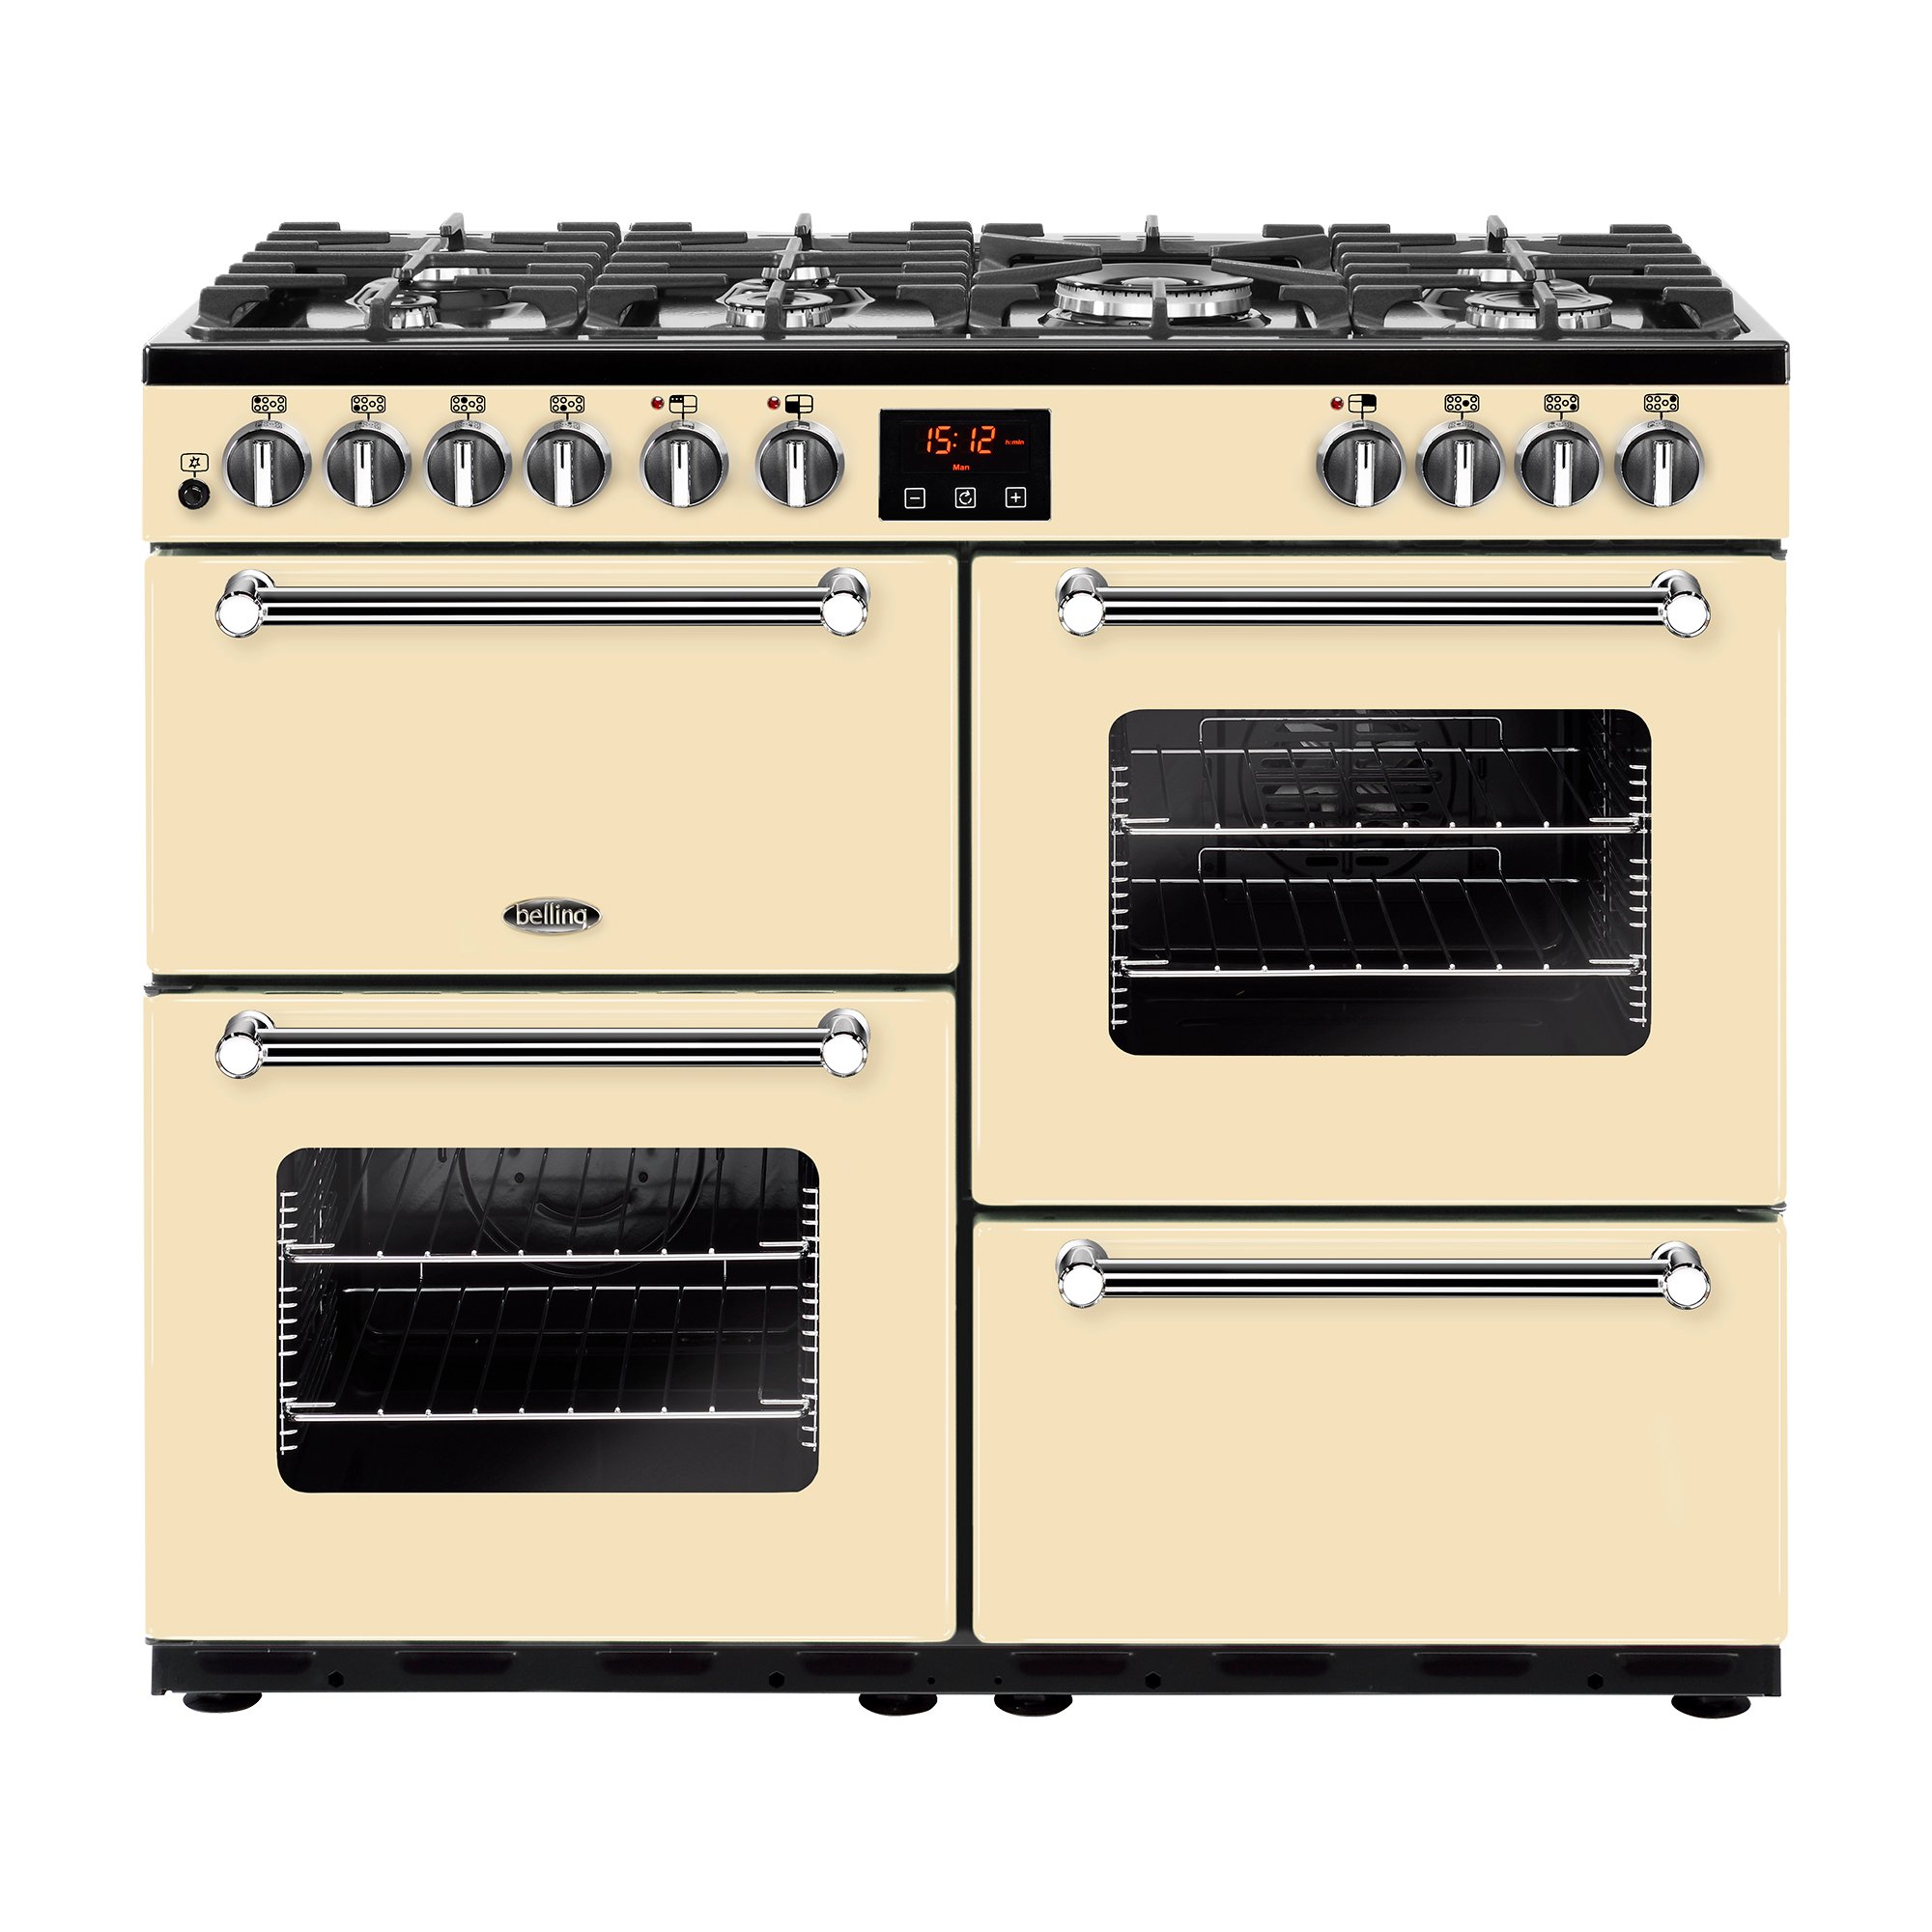 100cm dual fuel range cooker with 7 burner gas hob, Wok Burner, Cast Iron Pan Supports, variable rate electric grill and easy clean enamel.